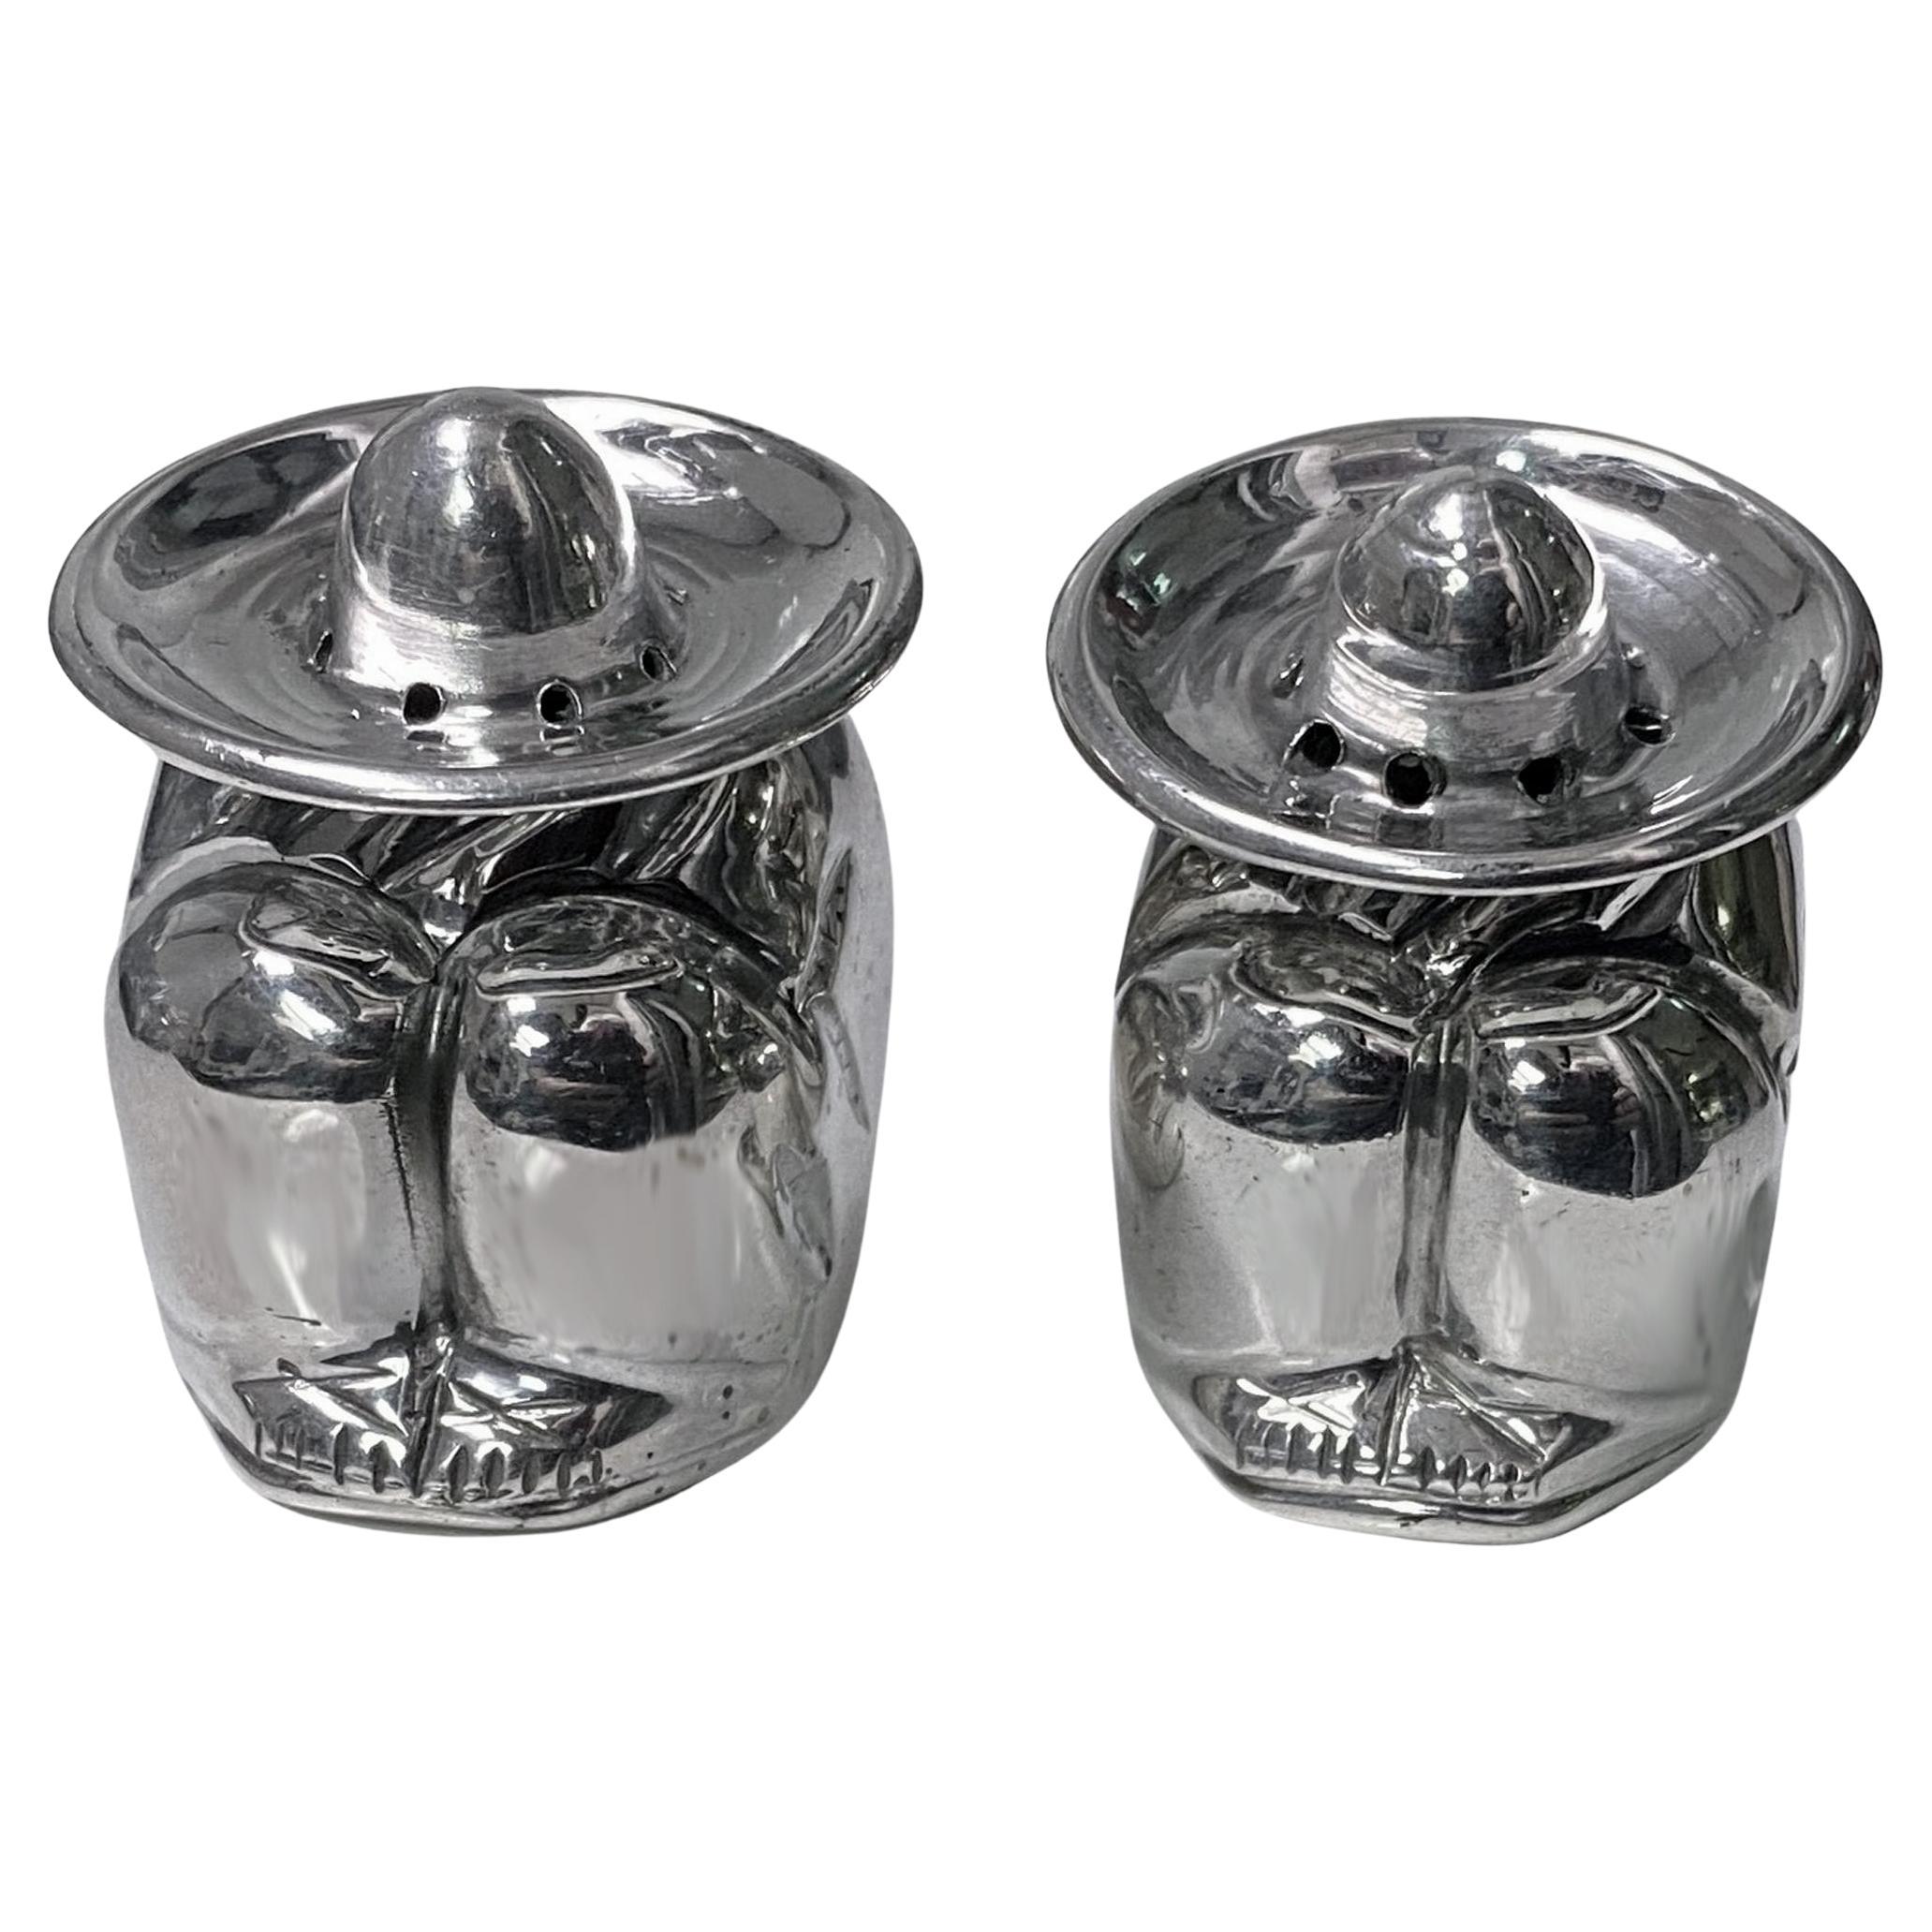 Sanborns Mexico C.1950’s Sterling Silver Salt and Pepper Casters